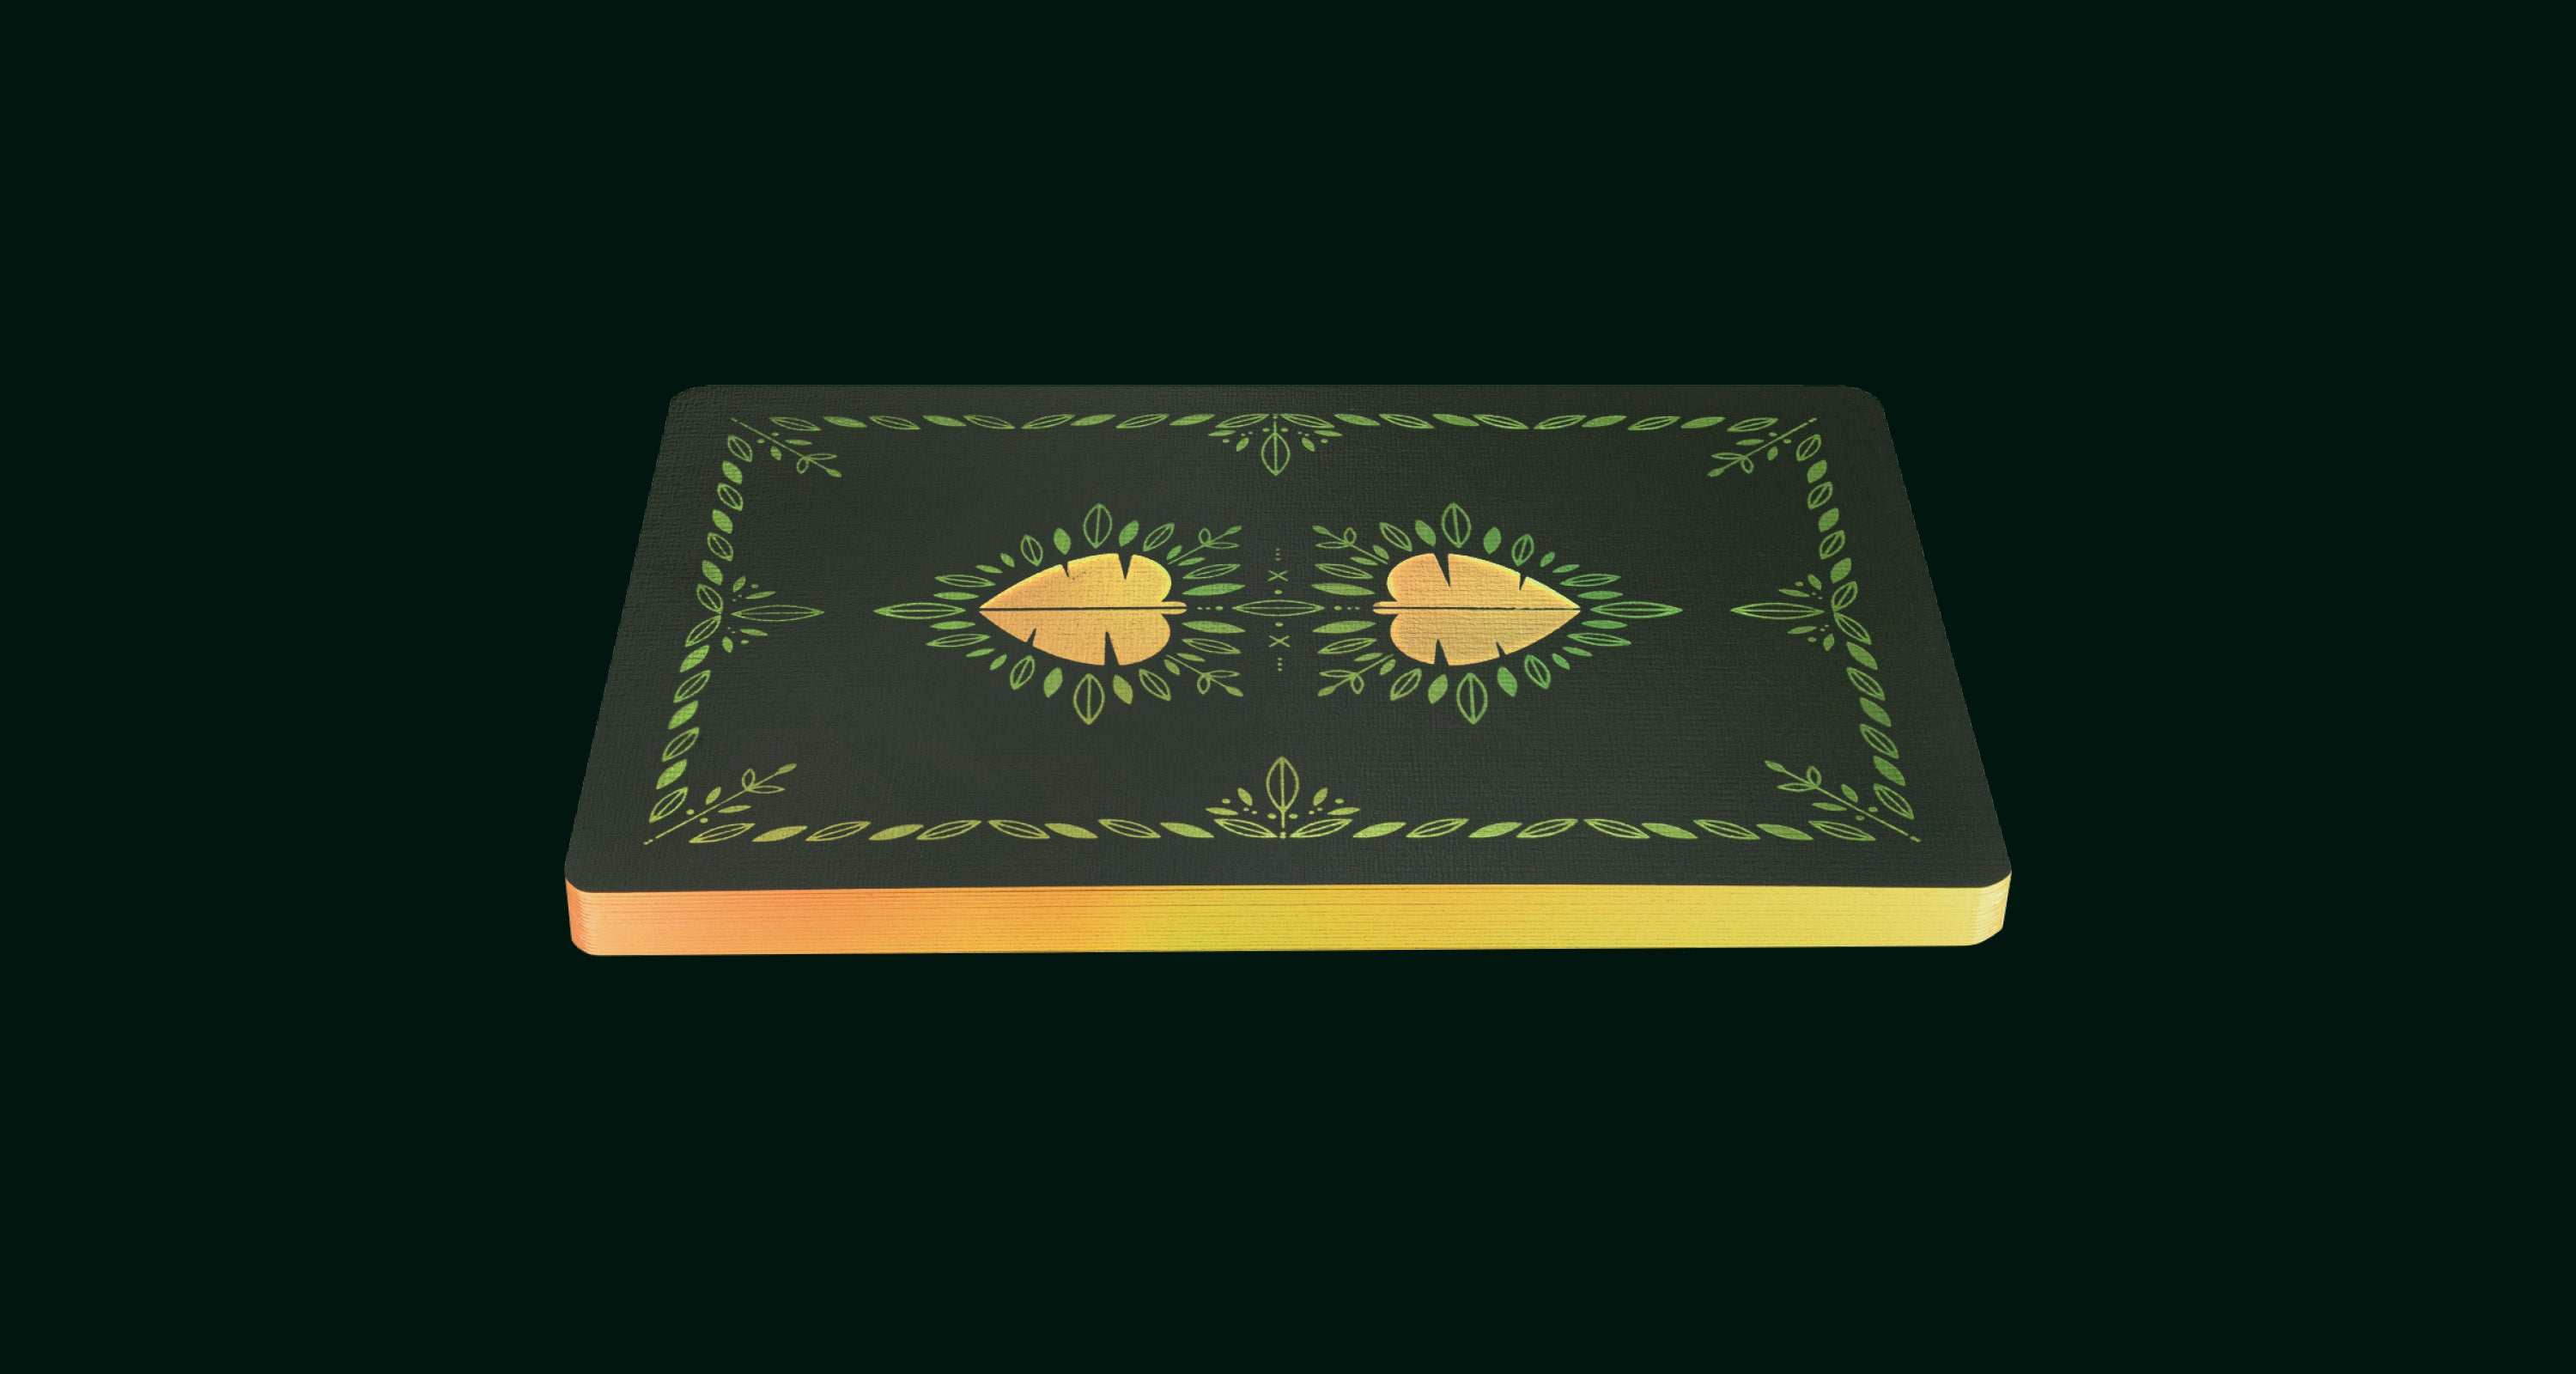 A floating card back on a dark green background